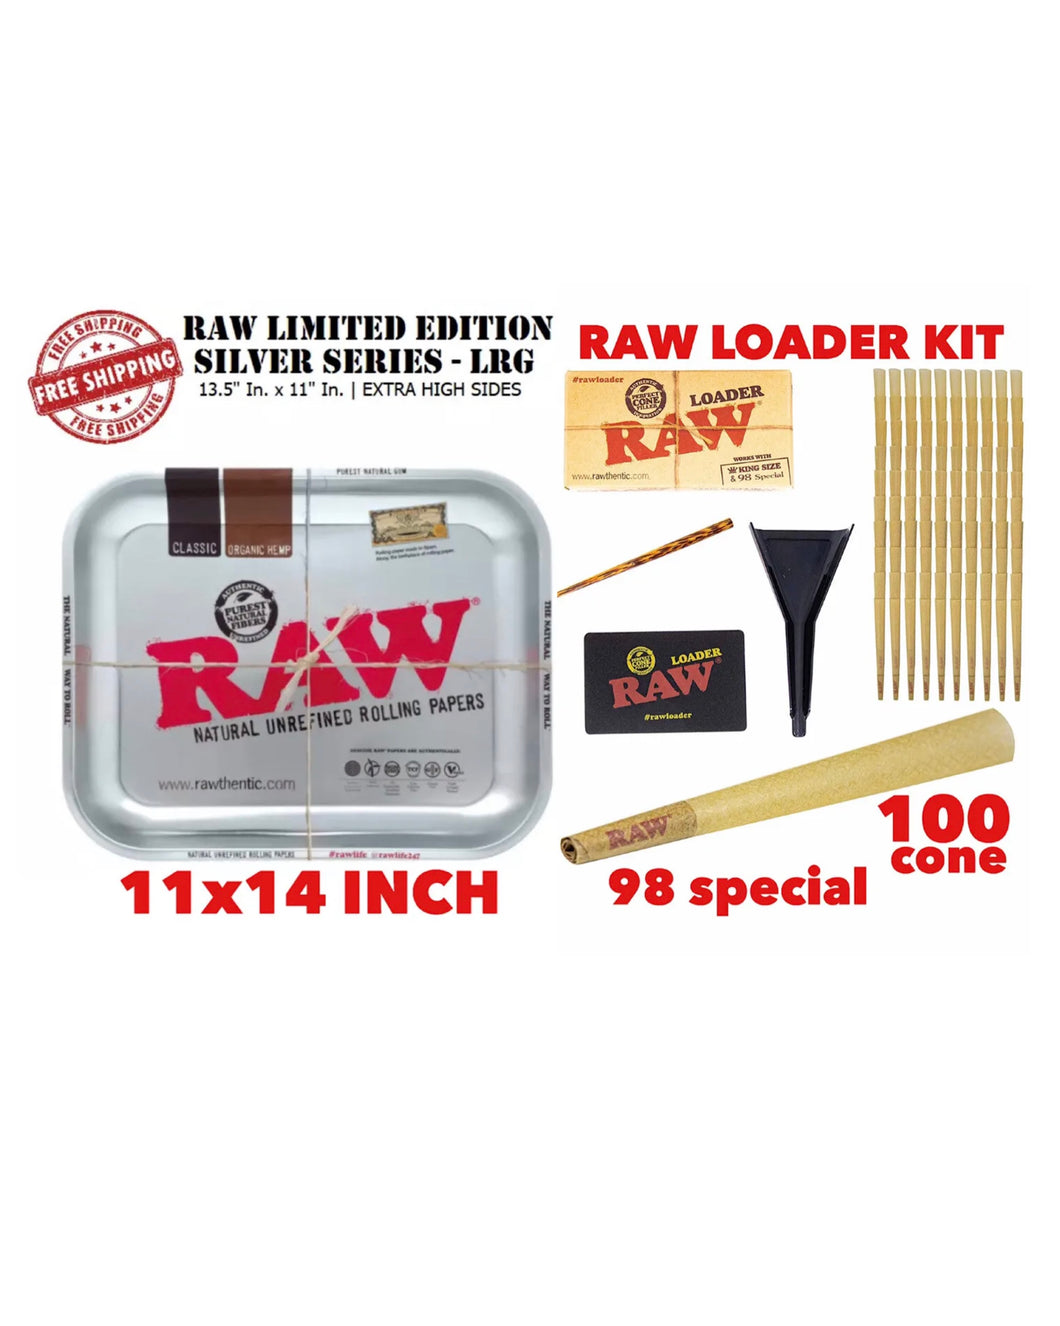 raw rolling metal tray(SILVER)large+raw 98 special size cone(100 pack)+cone loader kit